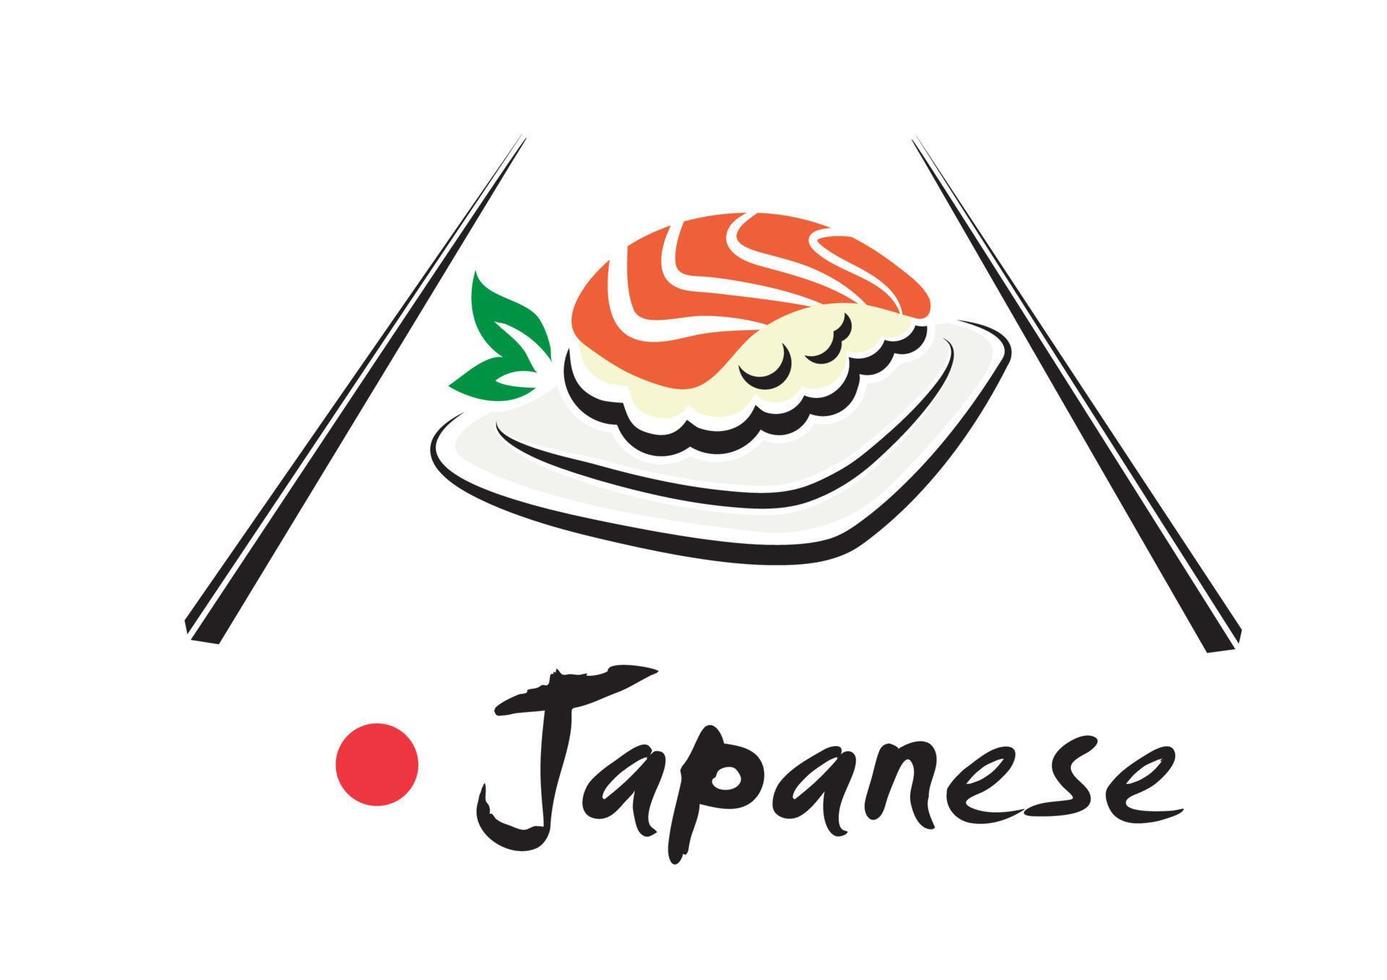 Japanese seafood symbol vector